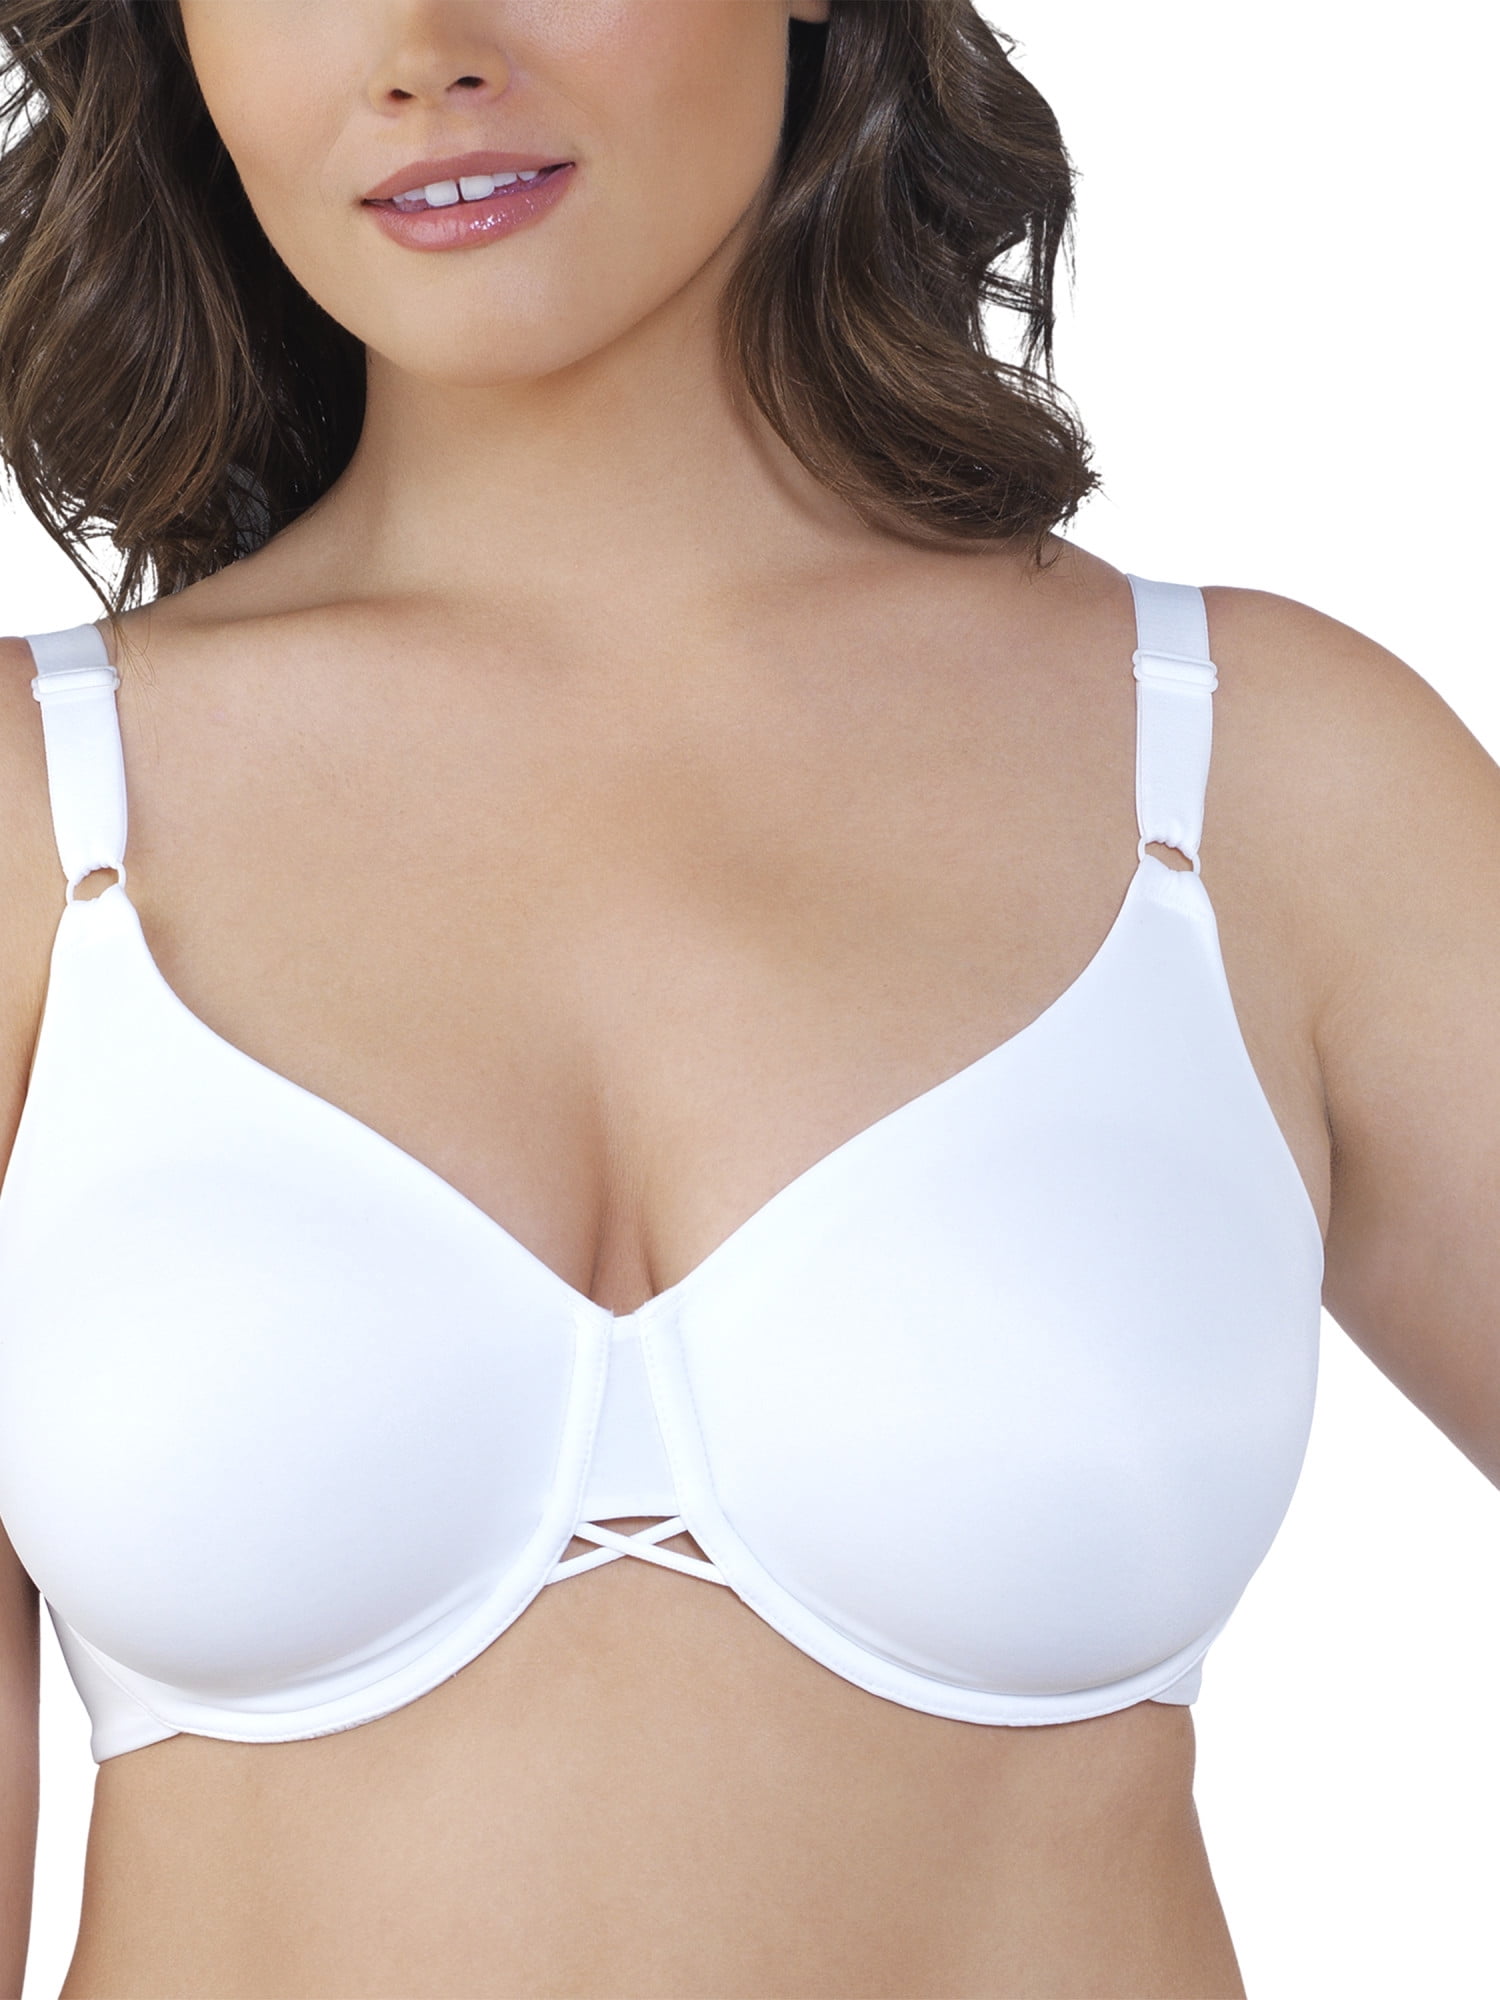  Wirarpa Bras For Women Ultra Soft Wire Free Comfortable Bra  Full Coverage Plus Size Minimizer Non Padded 2 Pack White 42C